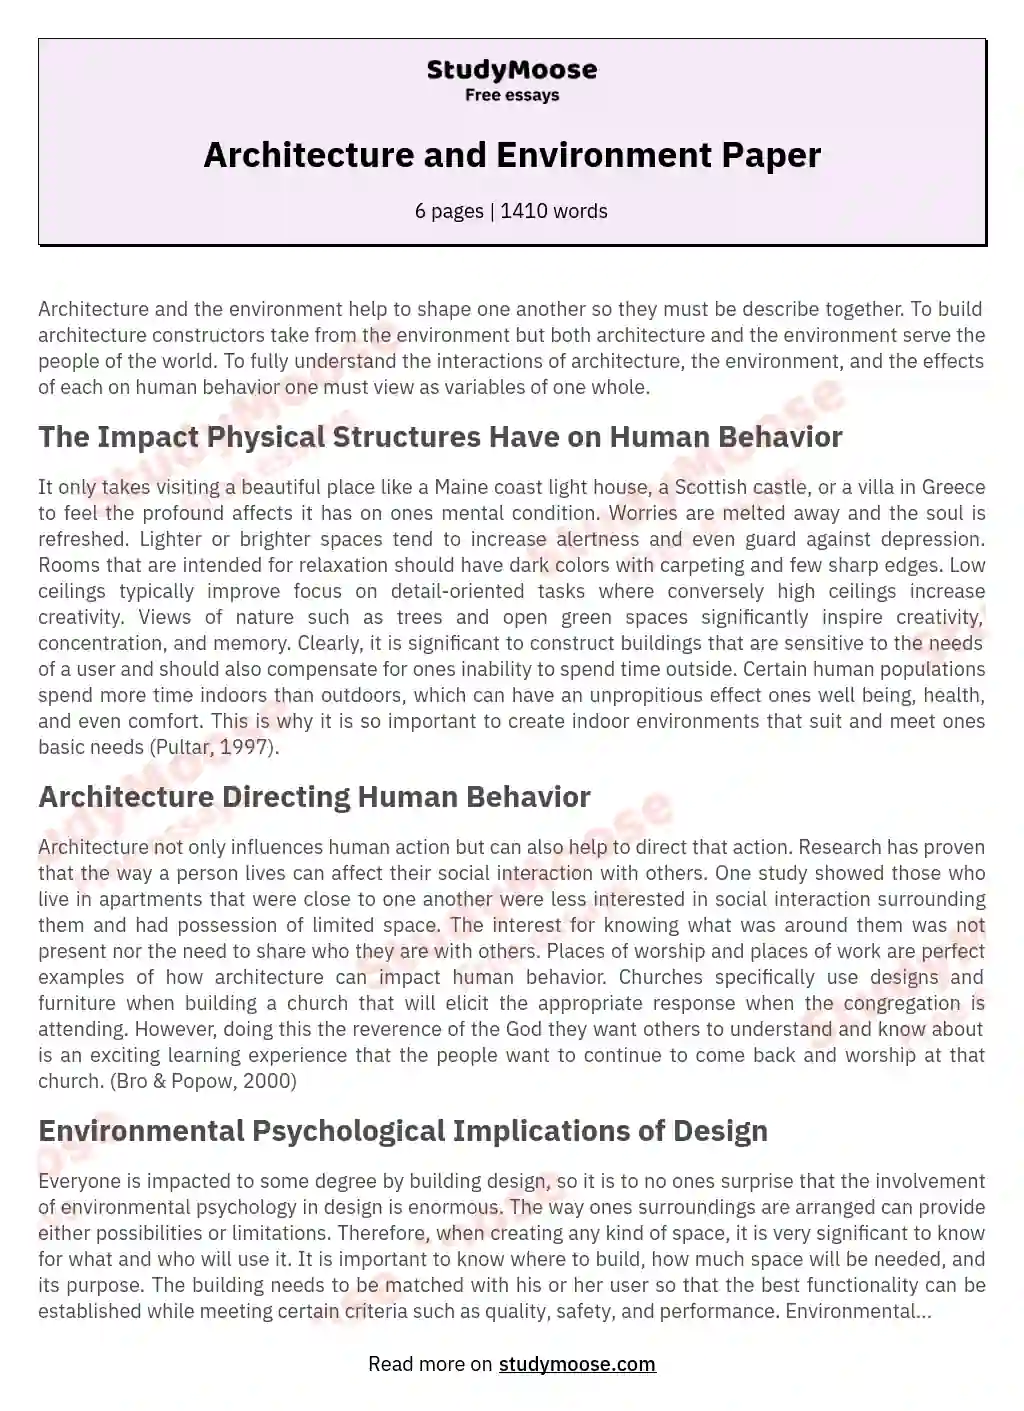 Architecture and Environment Paper